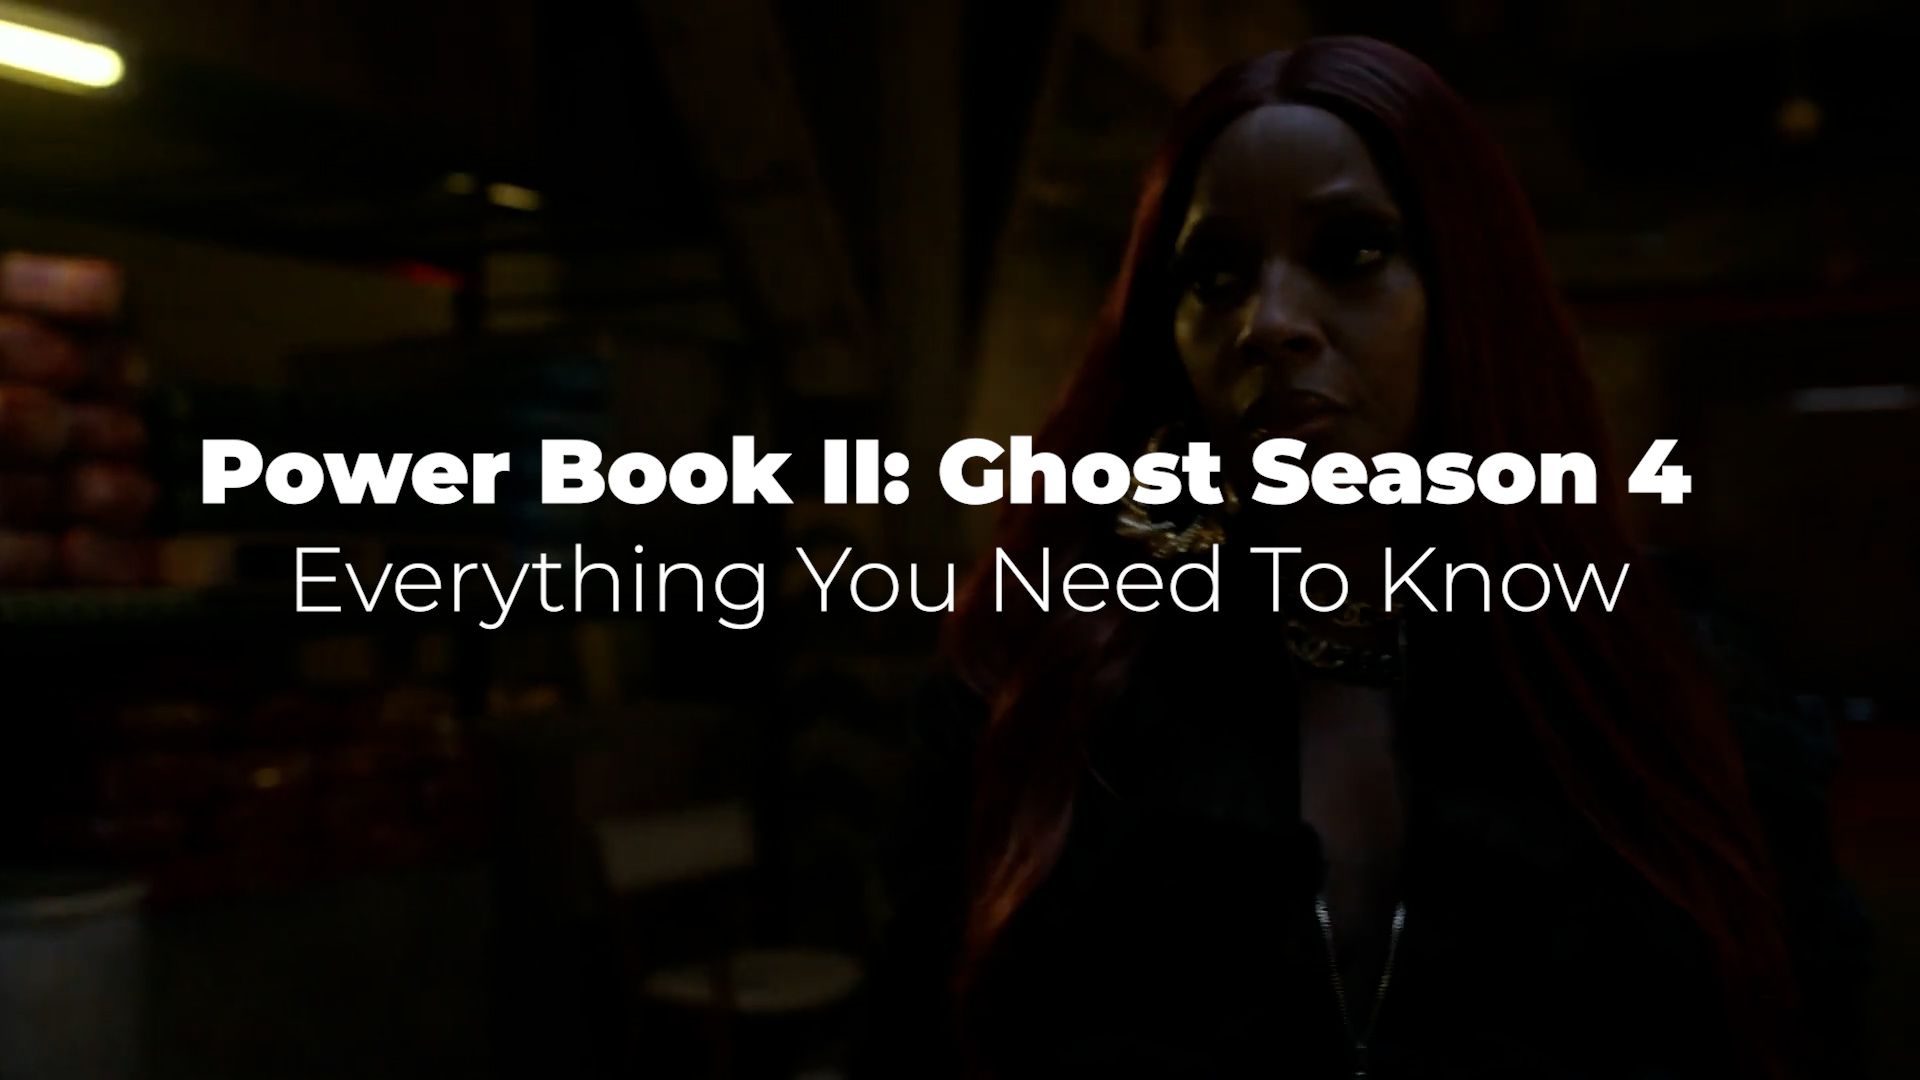 Power Book II: Ghost Teaser: Monet Knows Not Everyone Can Be Trusted